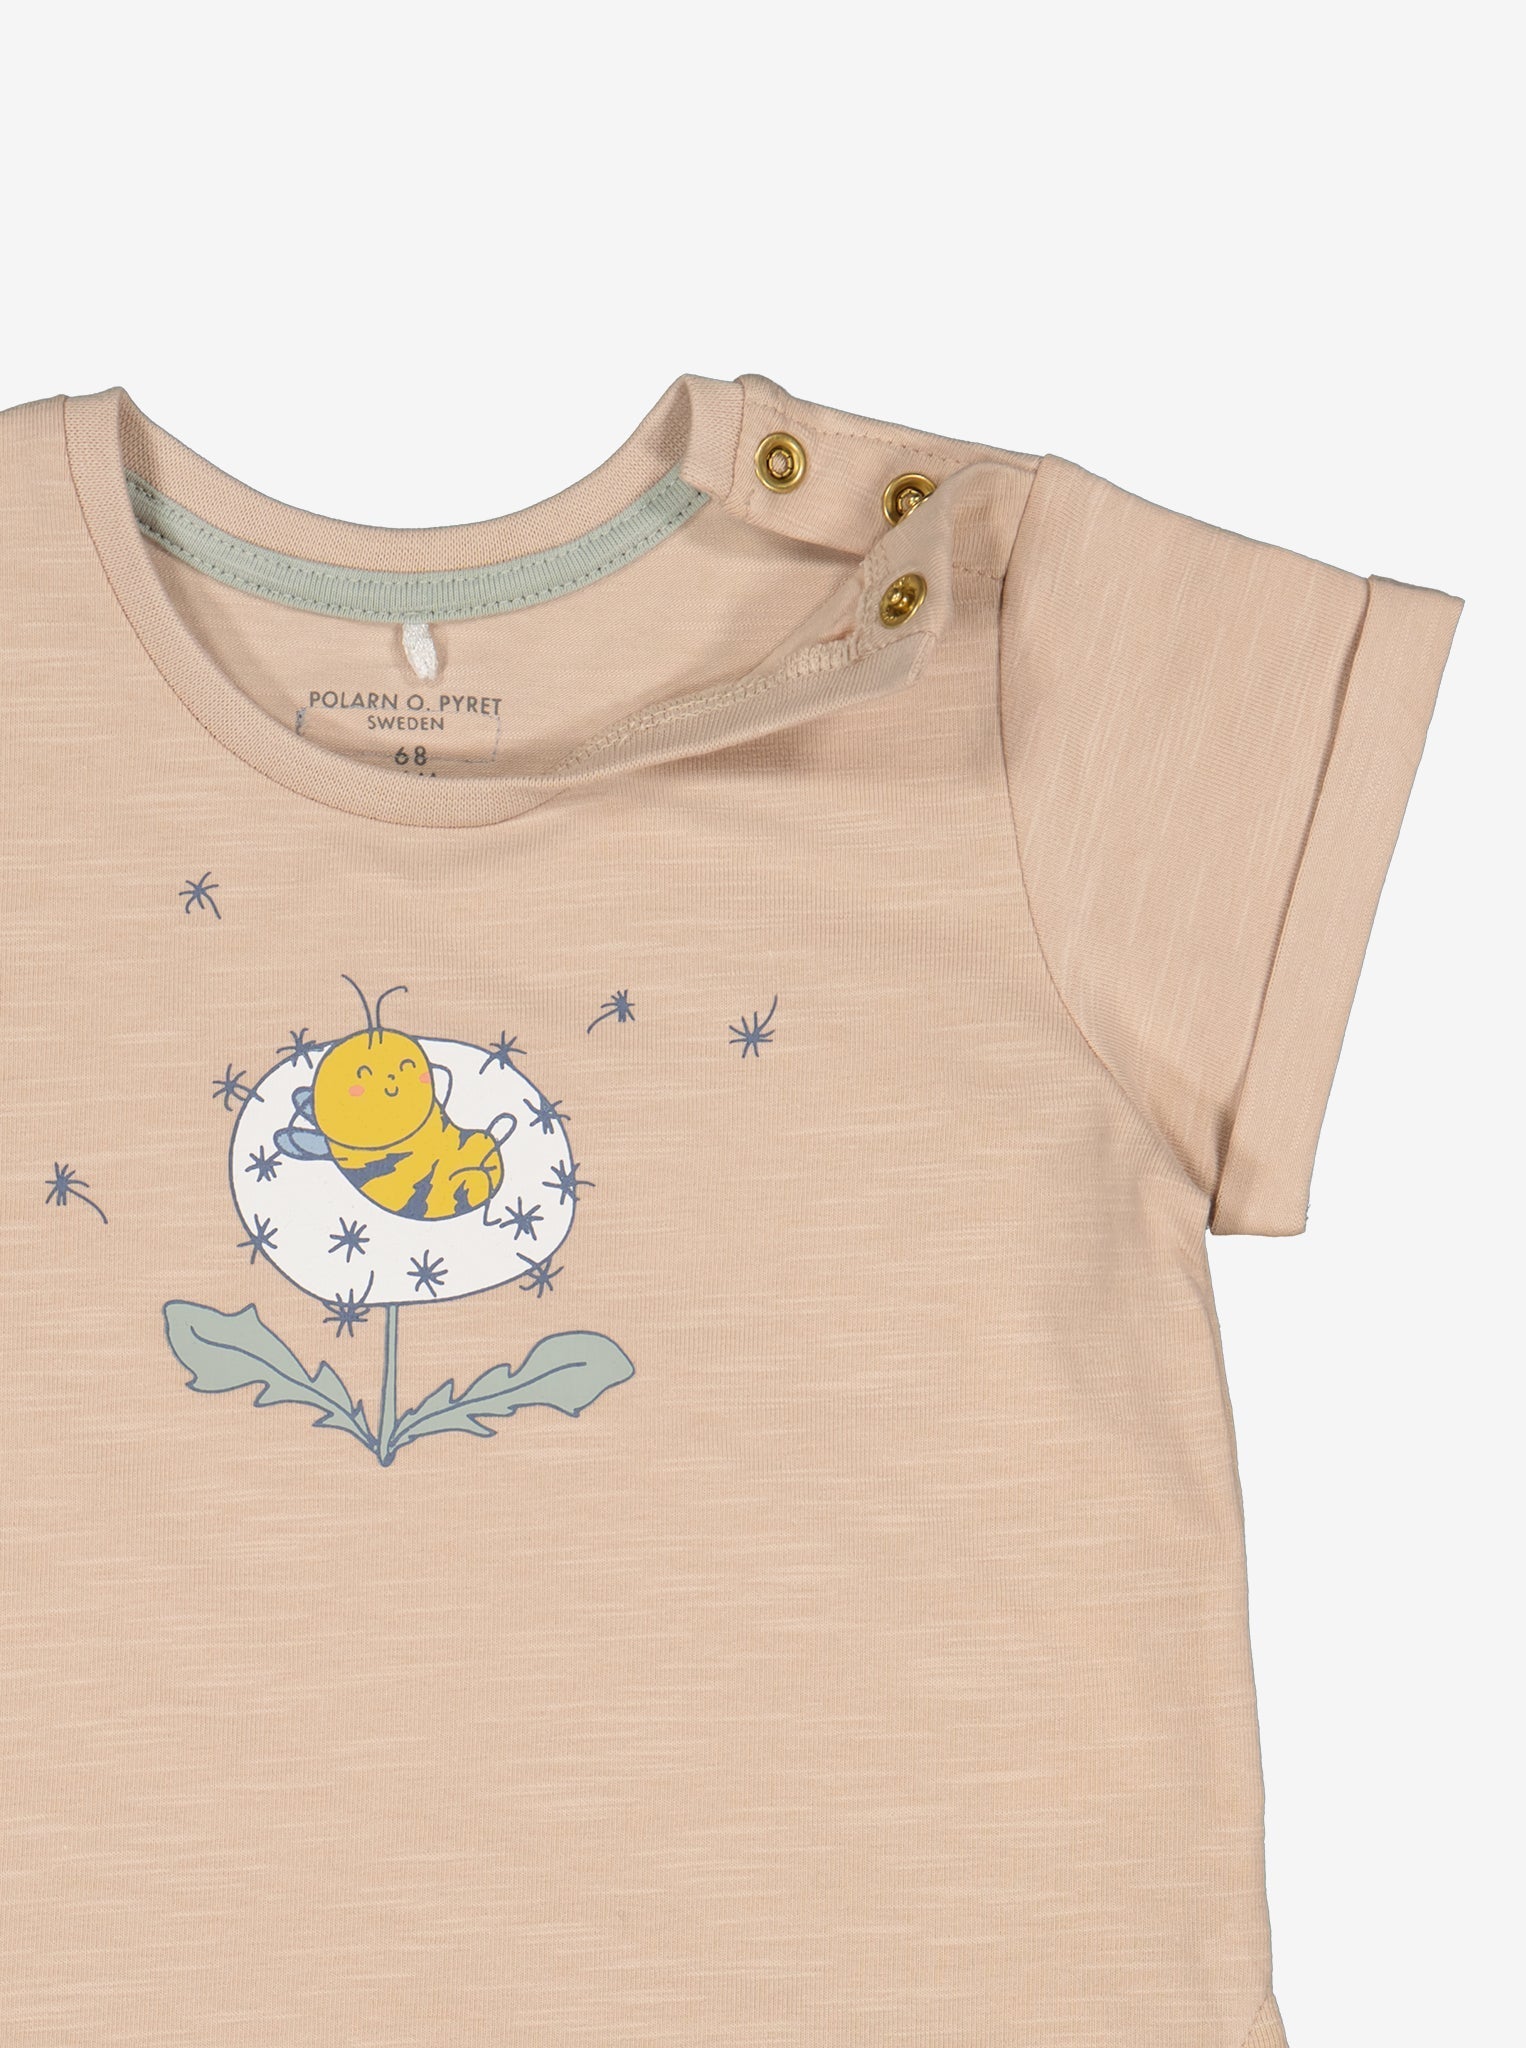 Bumble Bee Unisex Baby T-Shirt from Polarn O. Pyret Kidswear. Made from ethically sourced materials.